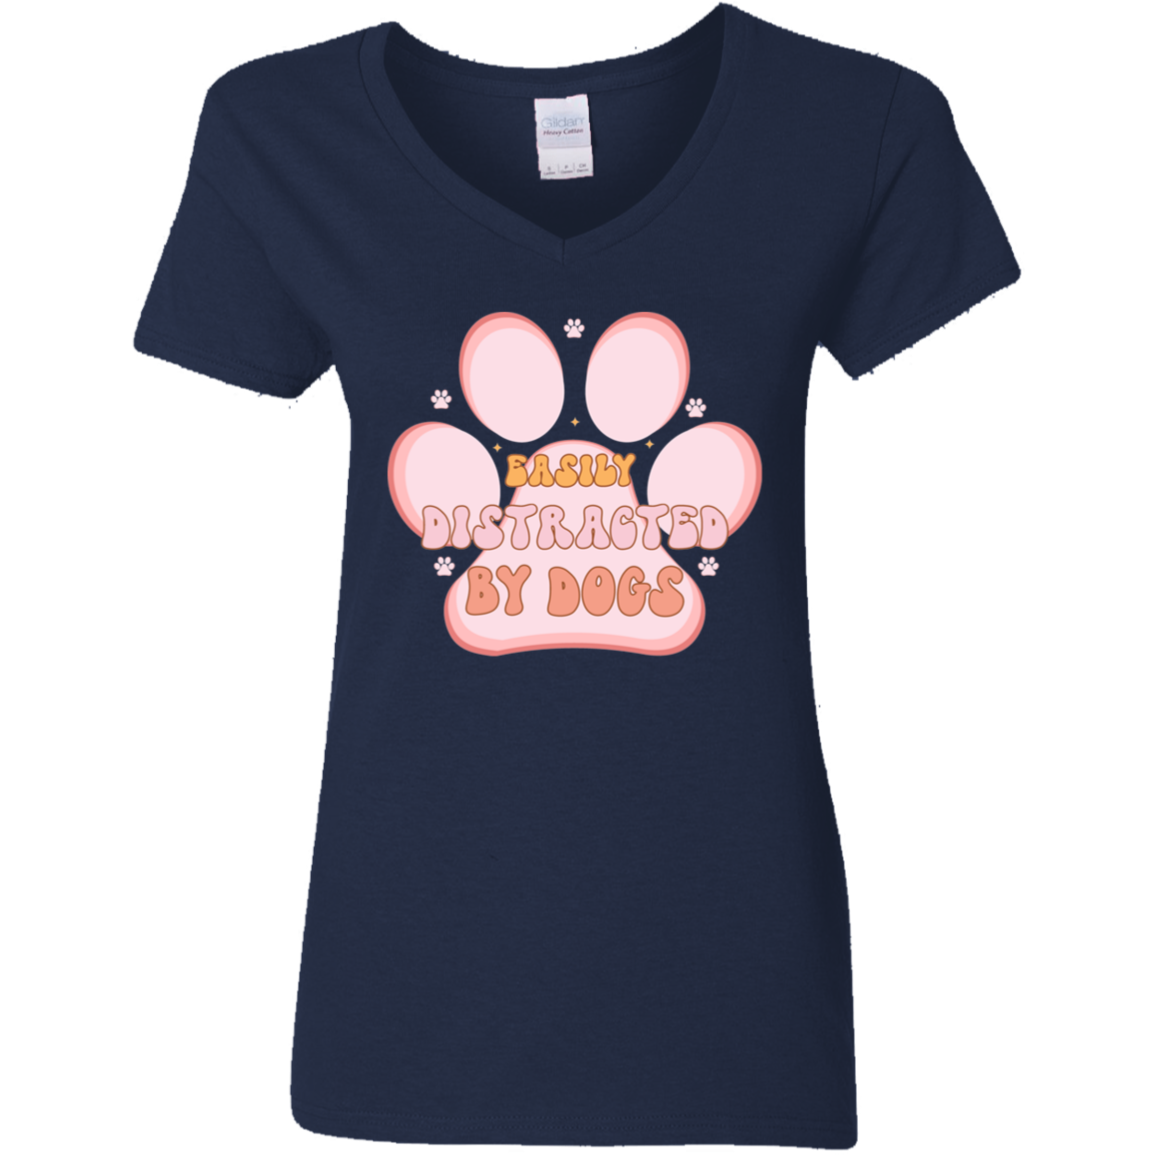 Easily Distracted by Dogs Ladies' V-Neck T-Shirt